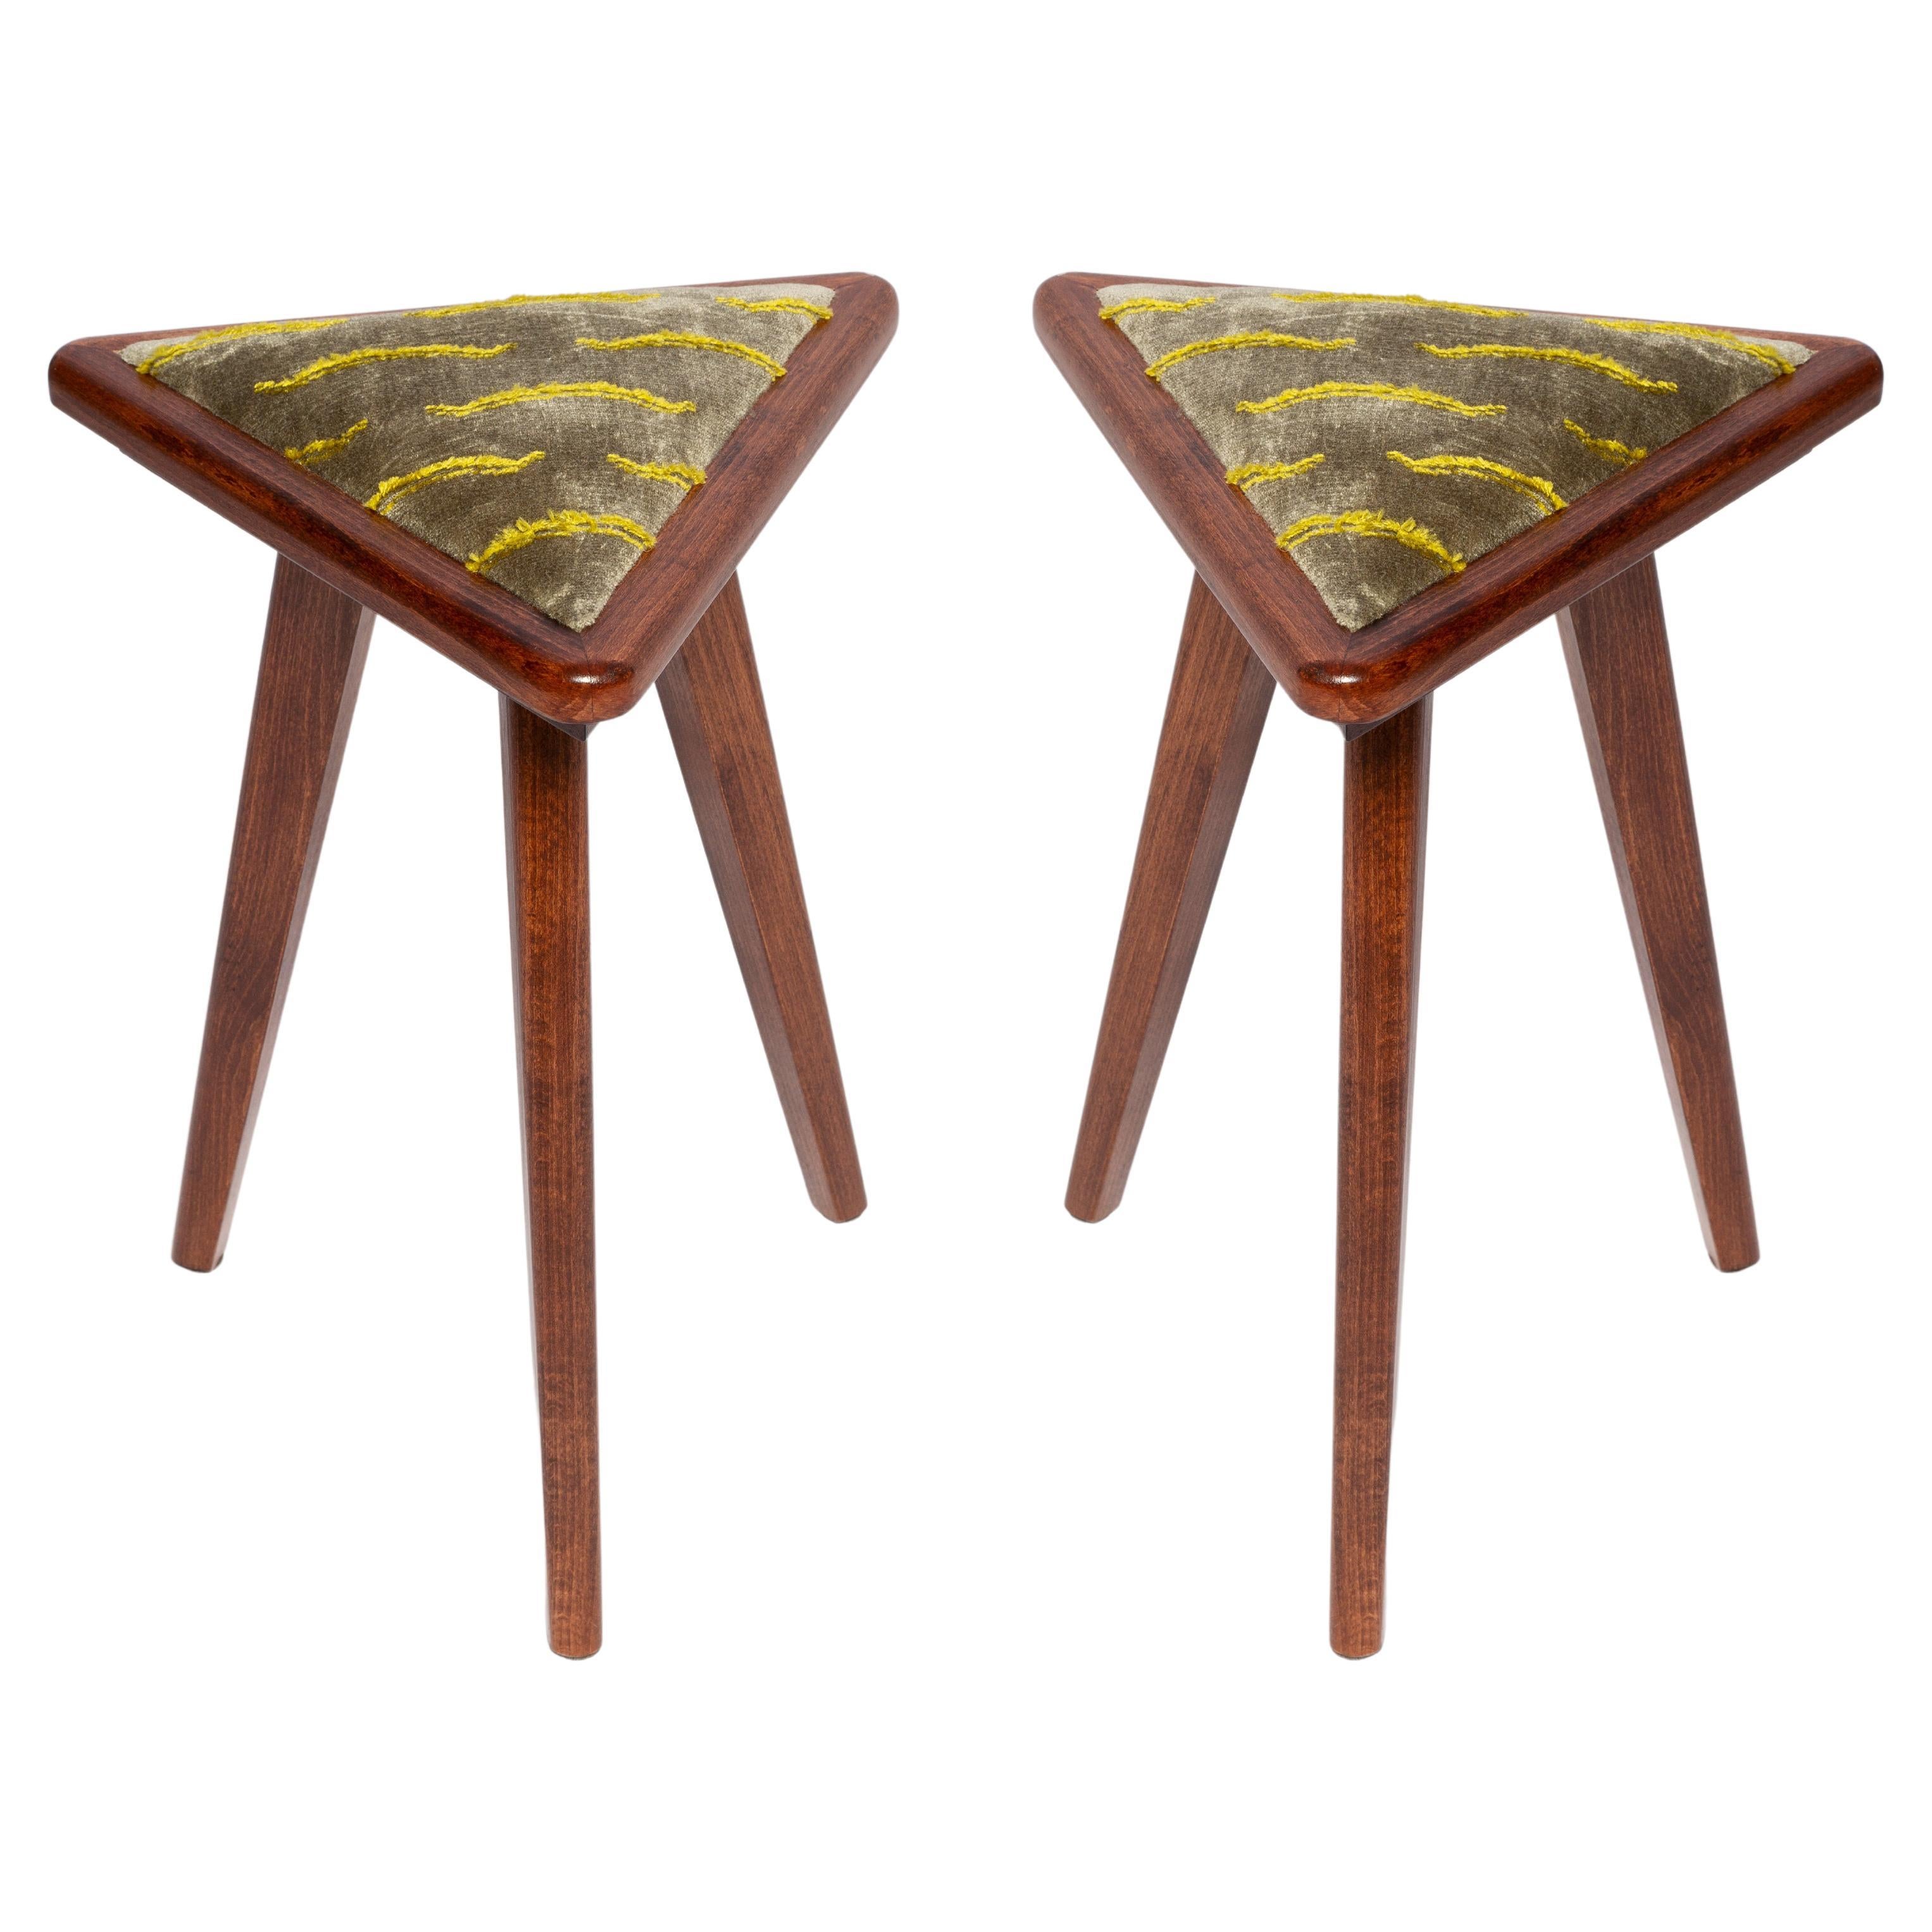 Set of 2 Mid-Century Style Triangle Stools in Nouvelles Vagues, Vintola, Europe For Sale